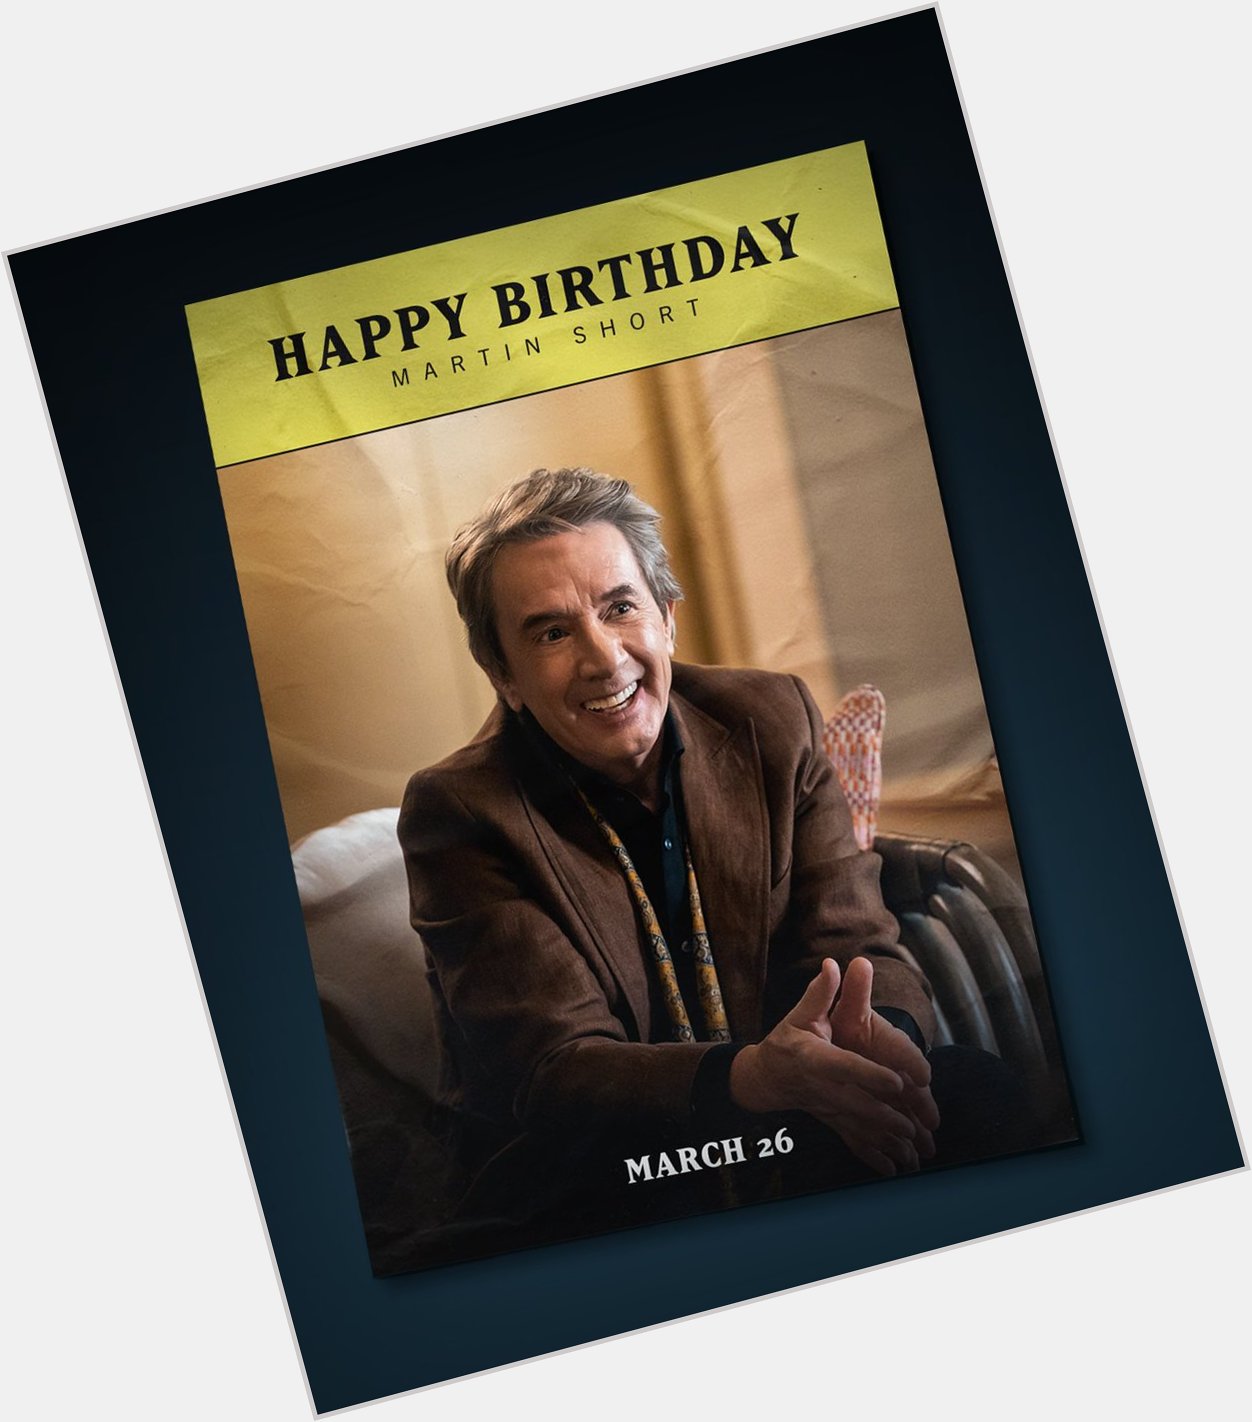 Happy Birthday to our favorite scarf wearing & dip loving director, Martin Short! 